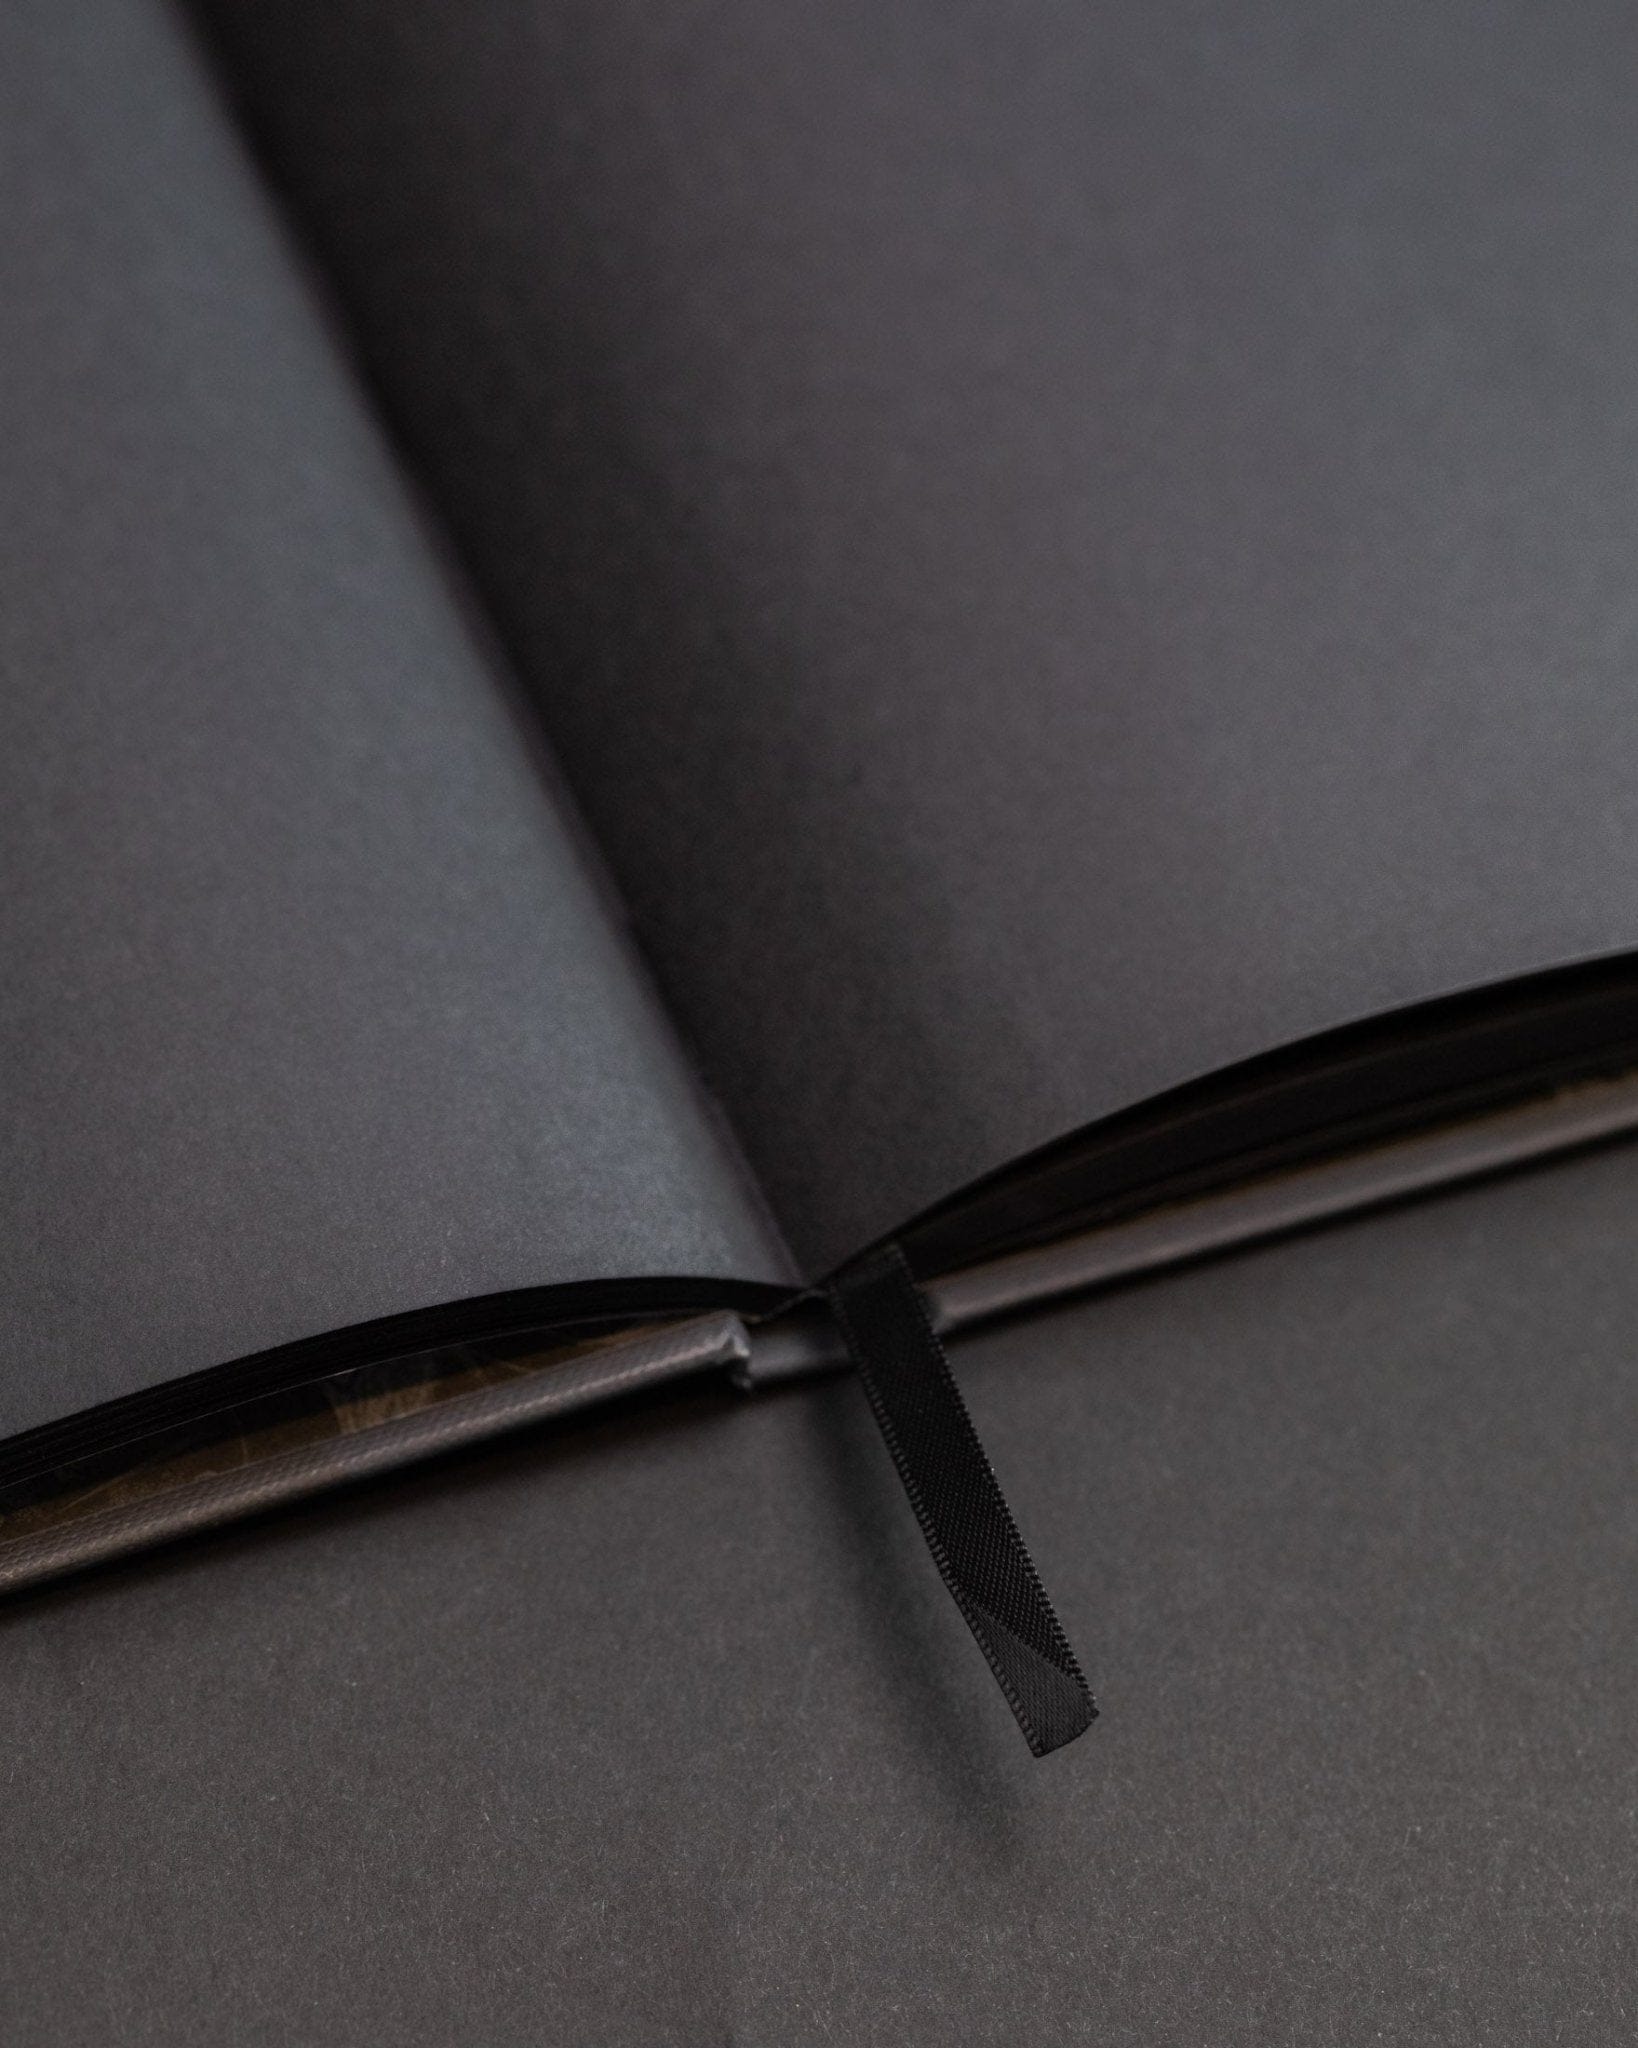 Black Paper Notebook For White Ink by Anachronistic